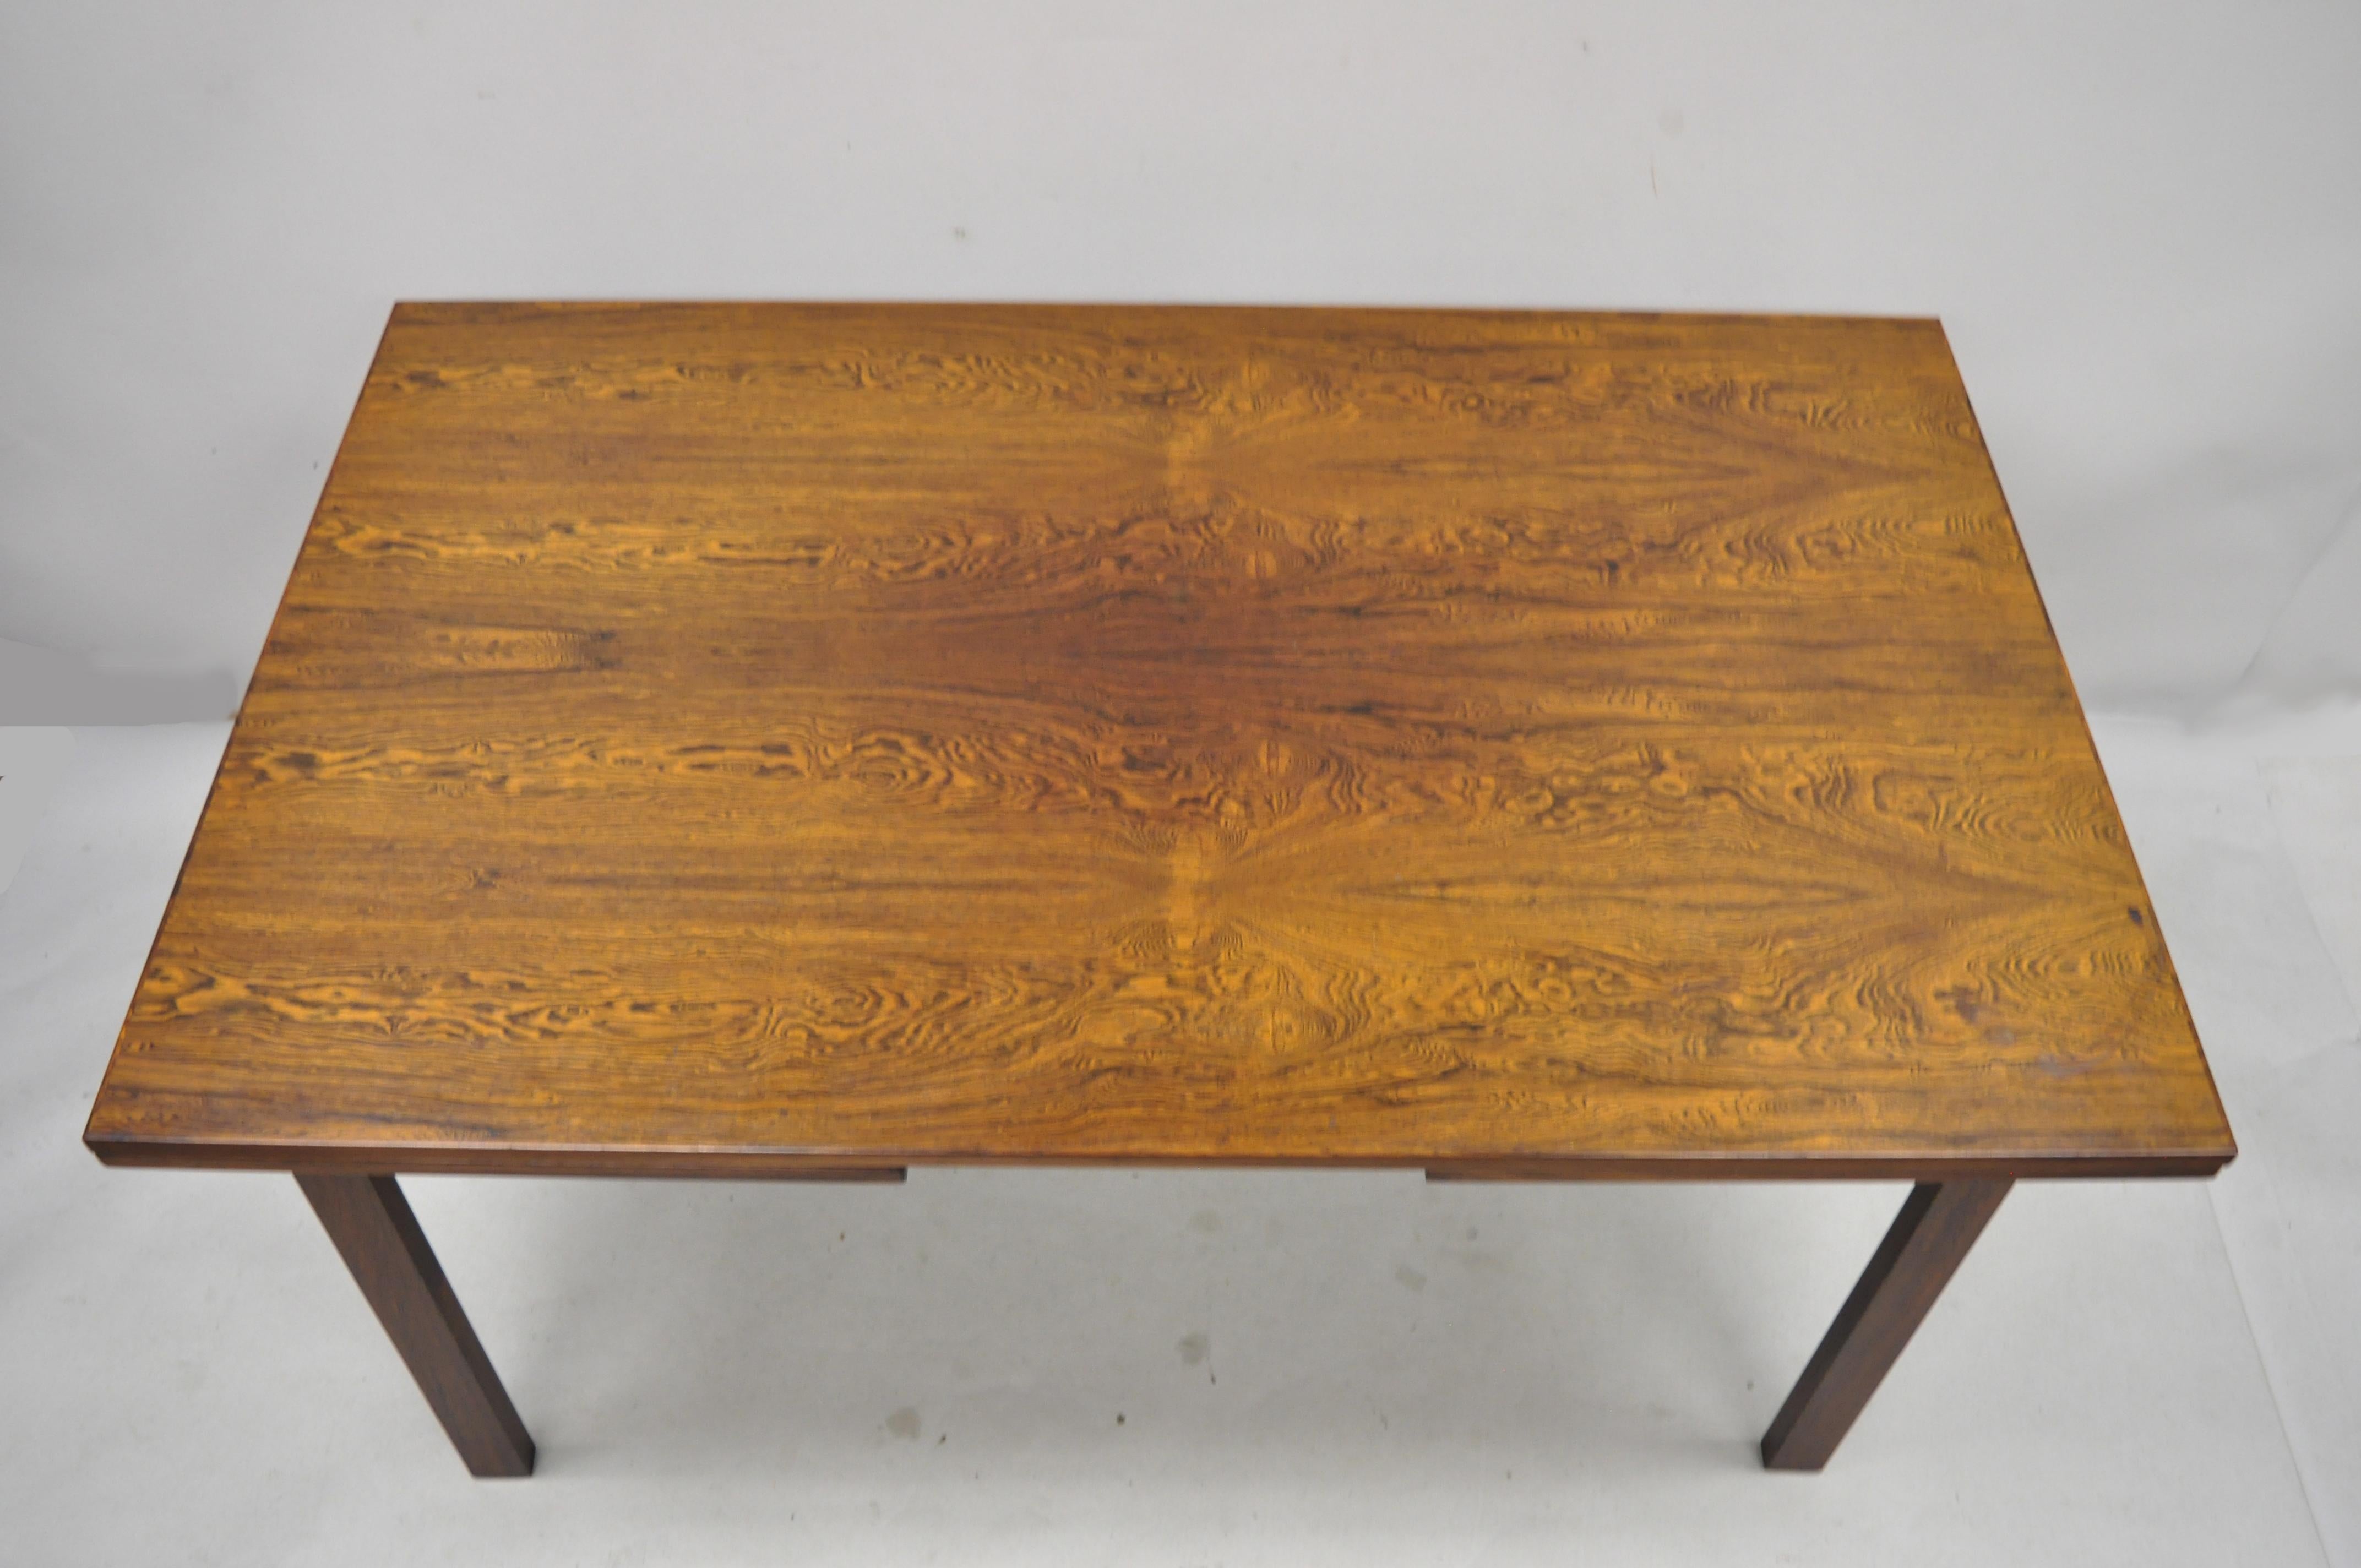 Vintage midcentury Danish modern rosewood draw leaf extension dining table. Item (2) pullout / pull-out extensions, beautiful wood grain, clean modernist lines, great style and form, circa mid-20th century. Measurements: 29